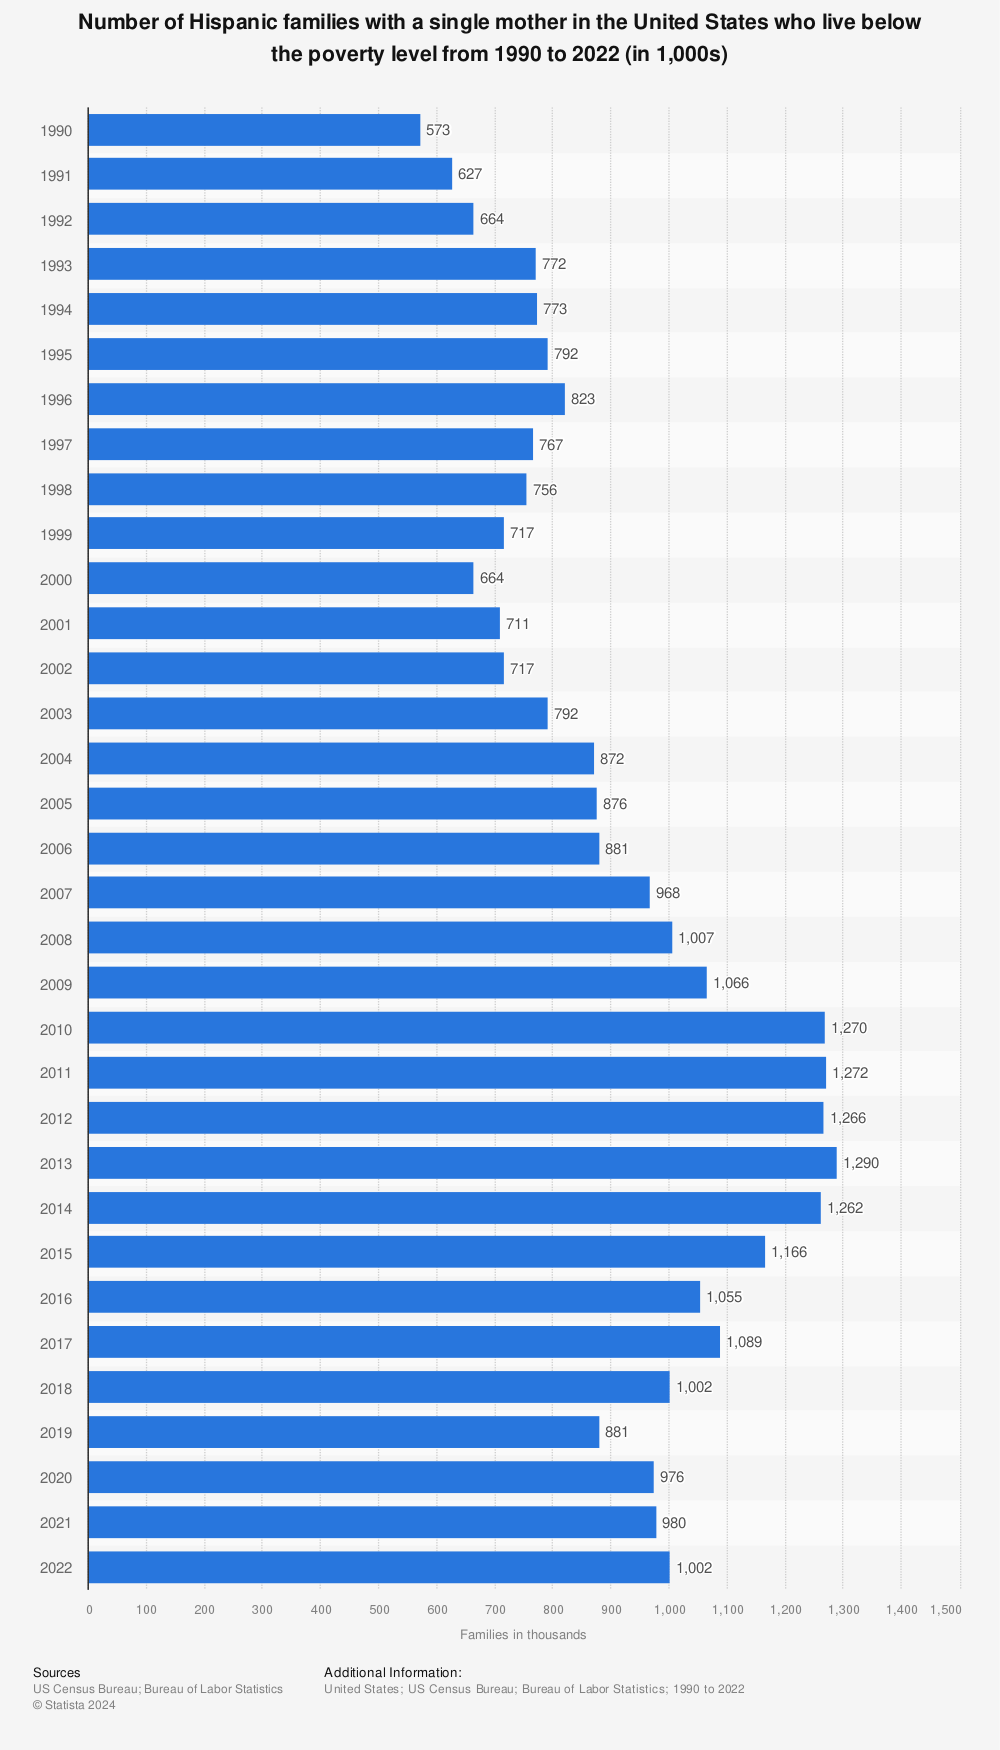 Statistic: Number of Hispanic families with a single mother in the U.S. who live below the poverty level from 1990 to 2020 (in 1,000s) | Statista